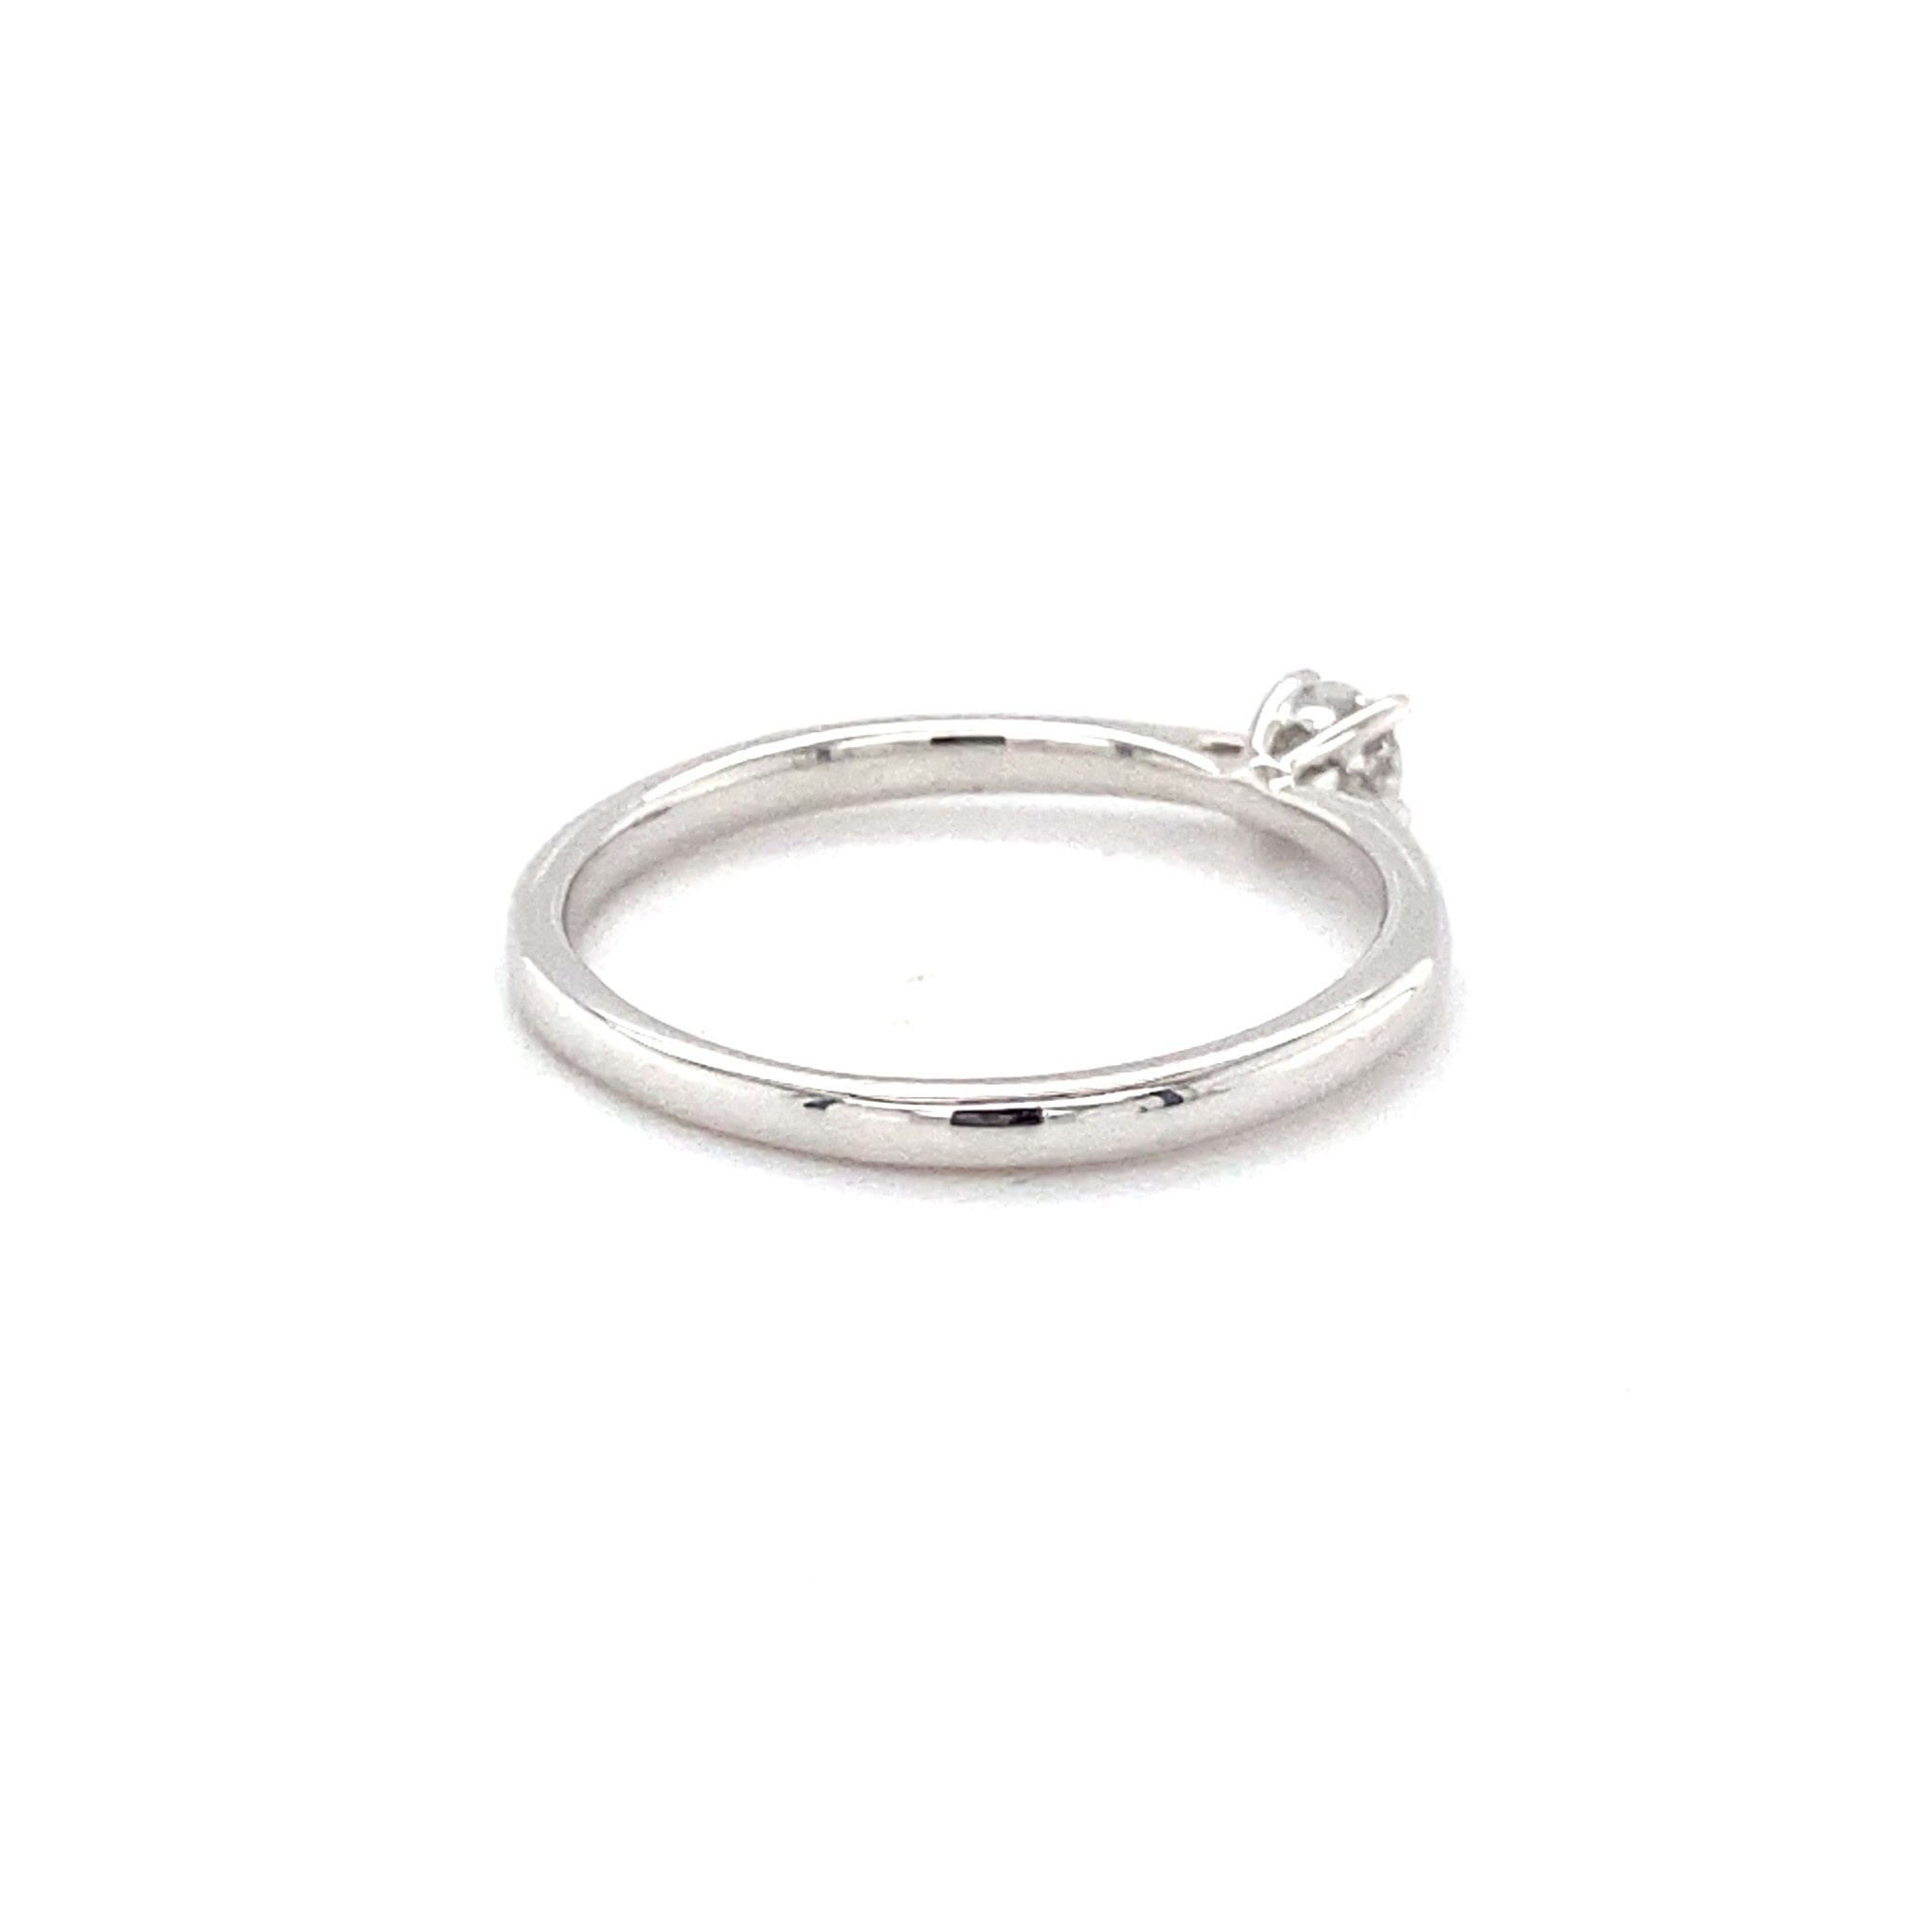 ROEMER ROEMER witgouden solitair ring 0.16ct